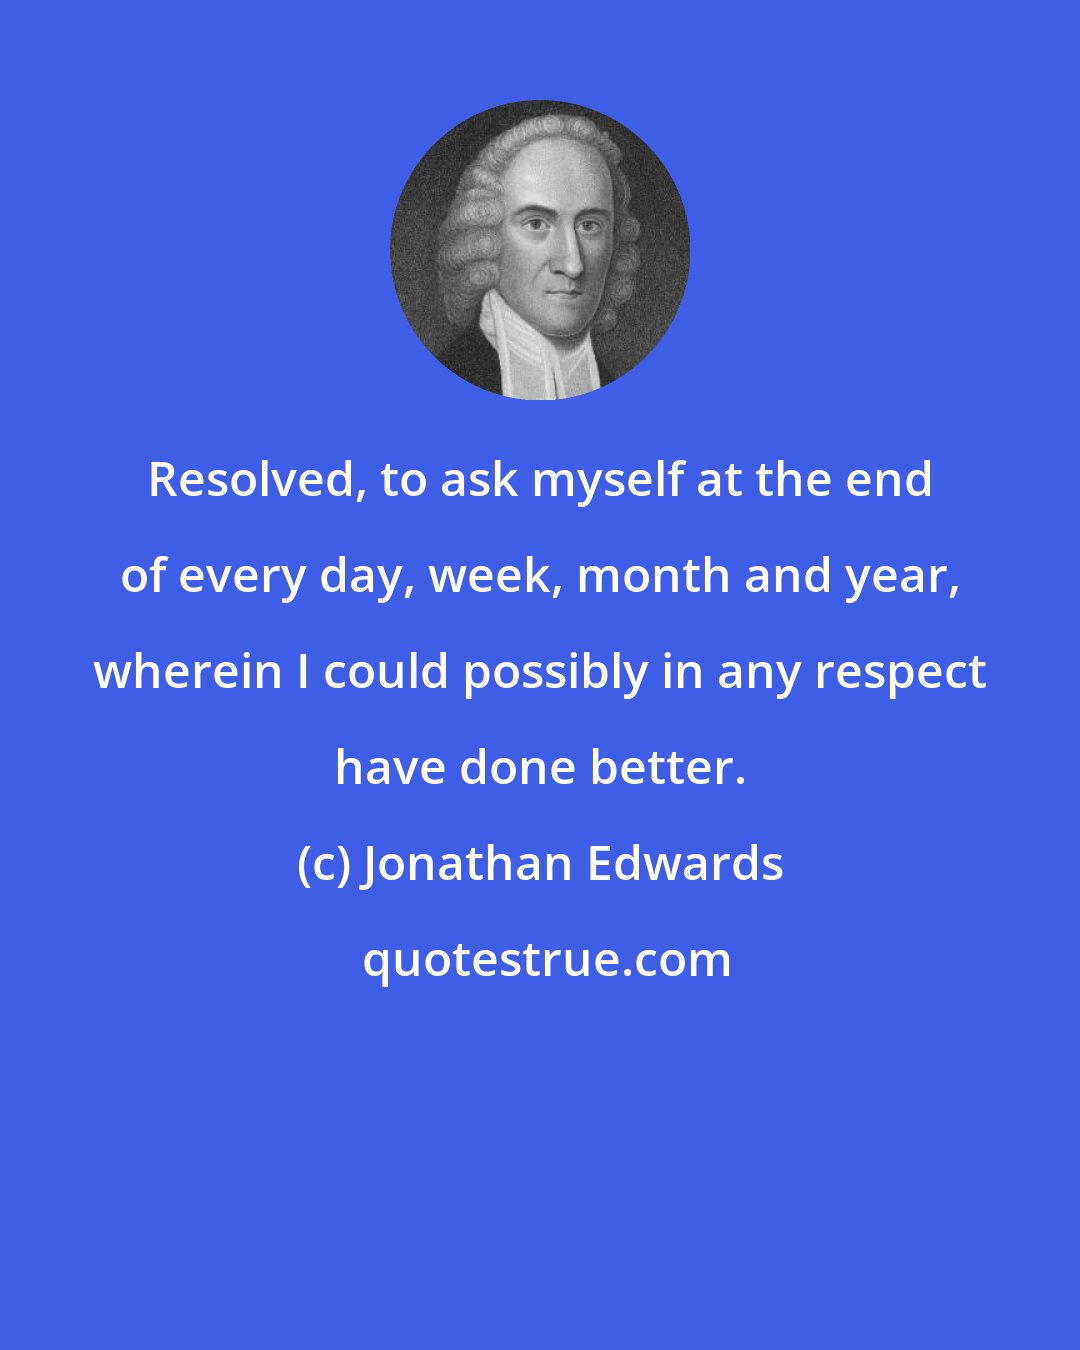 Jonathan Edwards: Resolved, to ask myself at the end of every day, week, month and year, wherein I could possibly in any respect have done better.